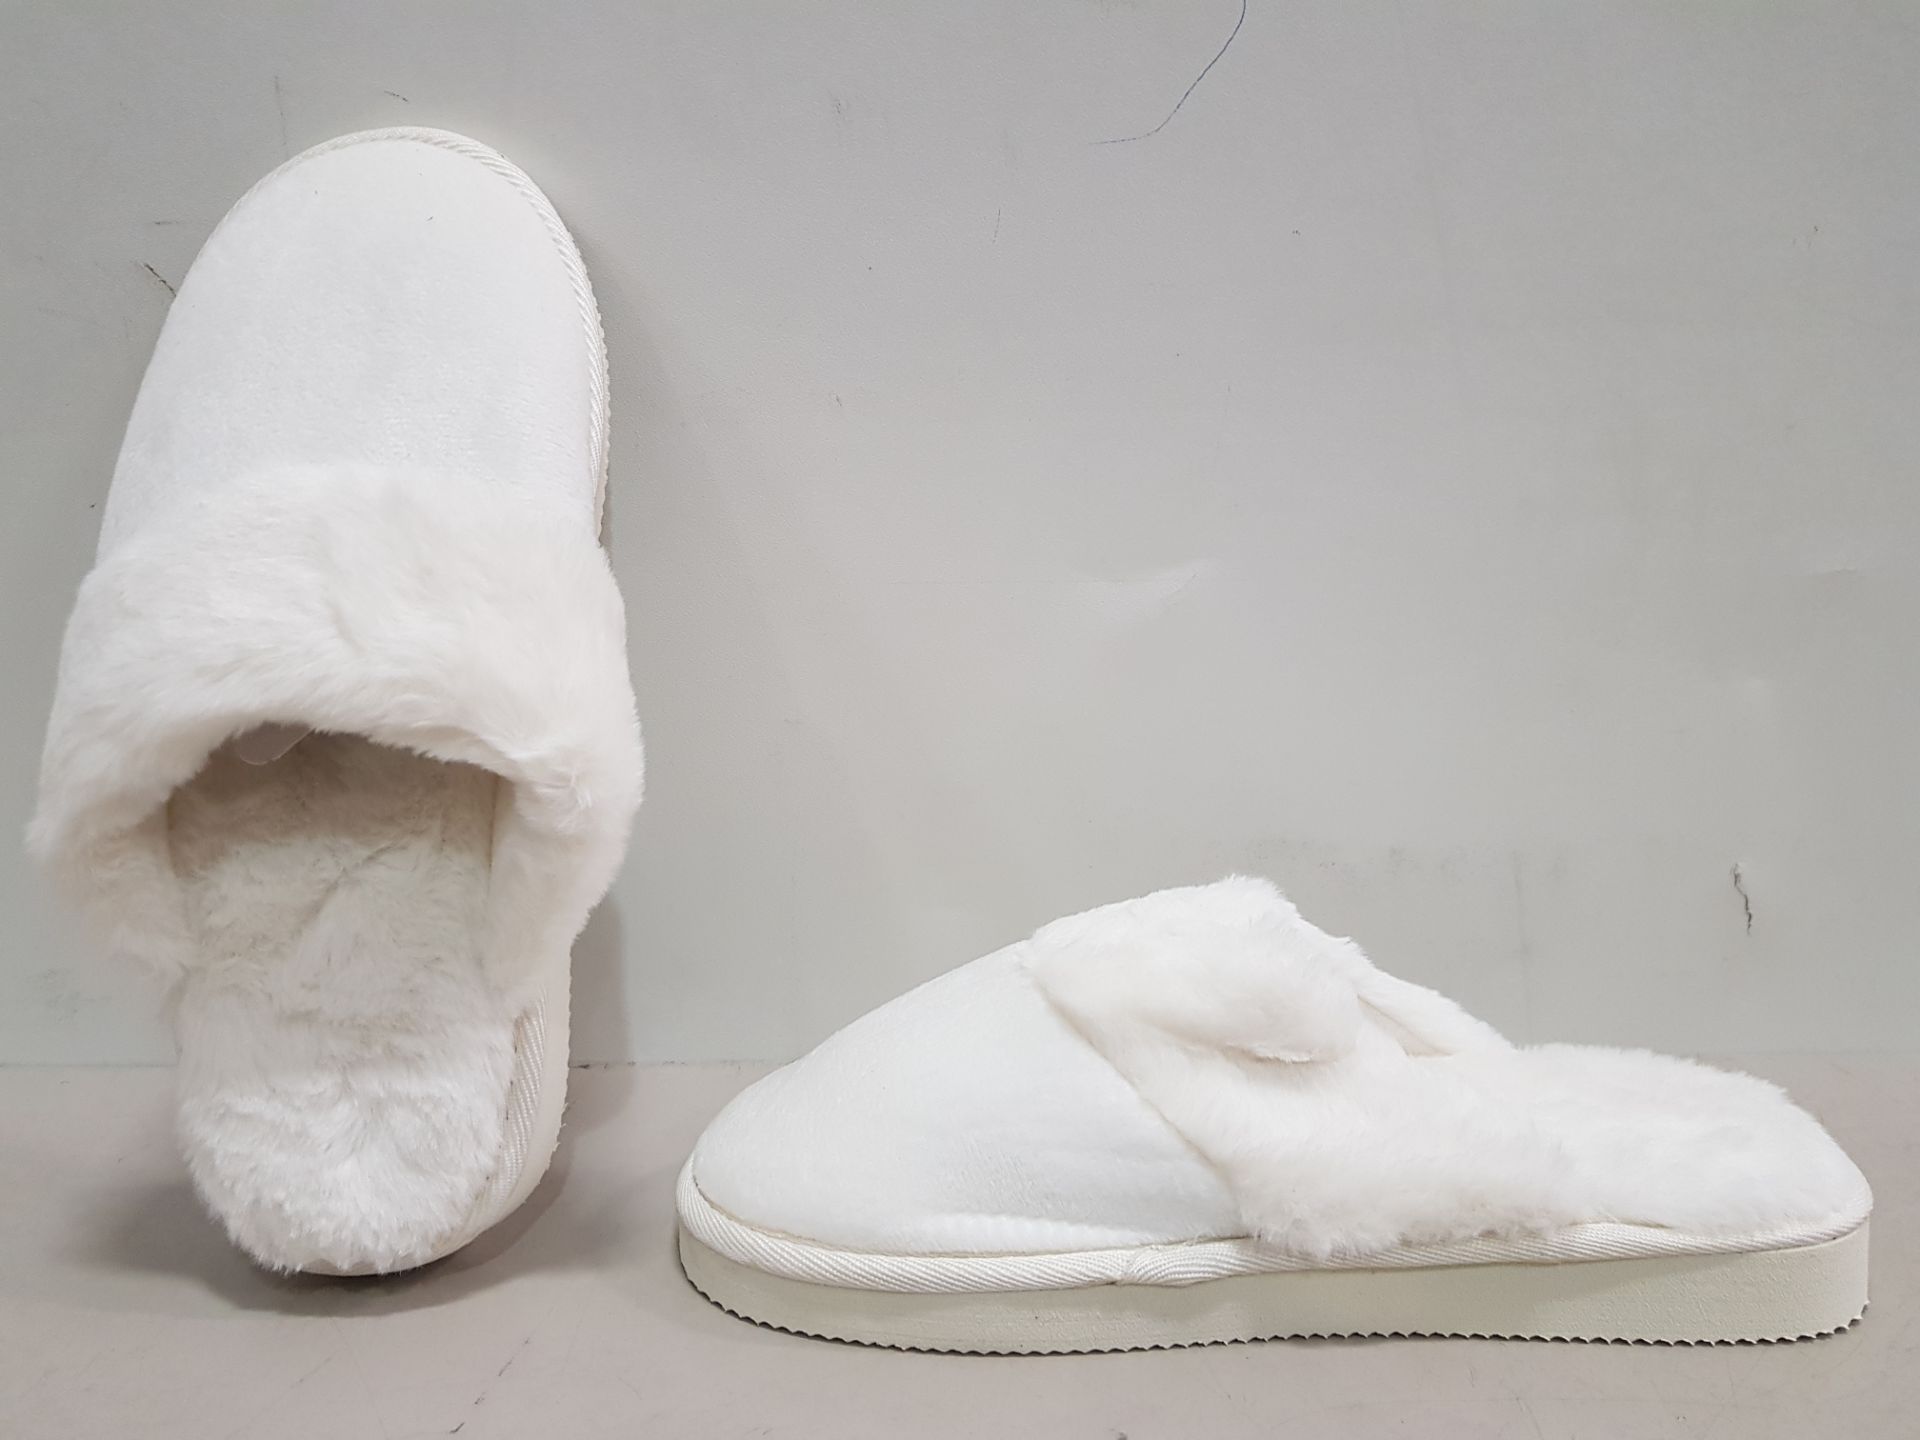 42 X BRAND NEW FAUX FUR INTERIOR AND EXTERIOR - RIBBED SOLE SLIPPERS - ALL IN CREAM - ALL IN SIZE